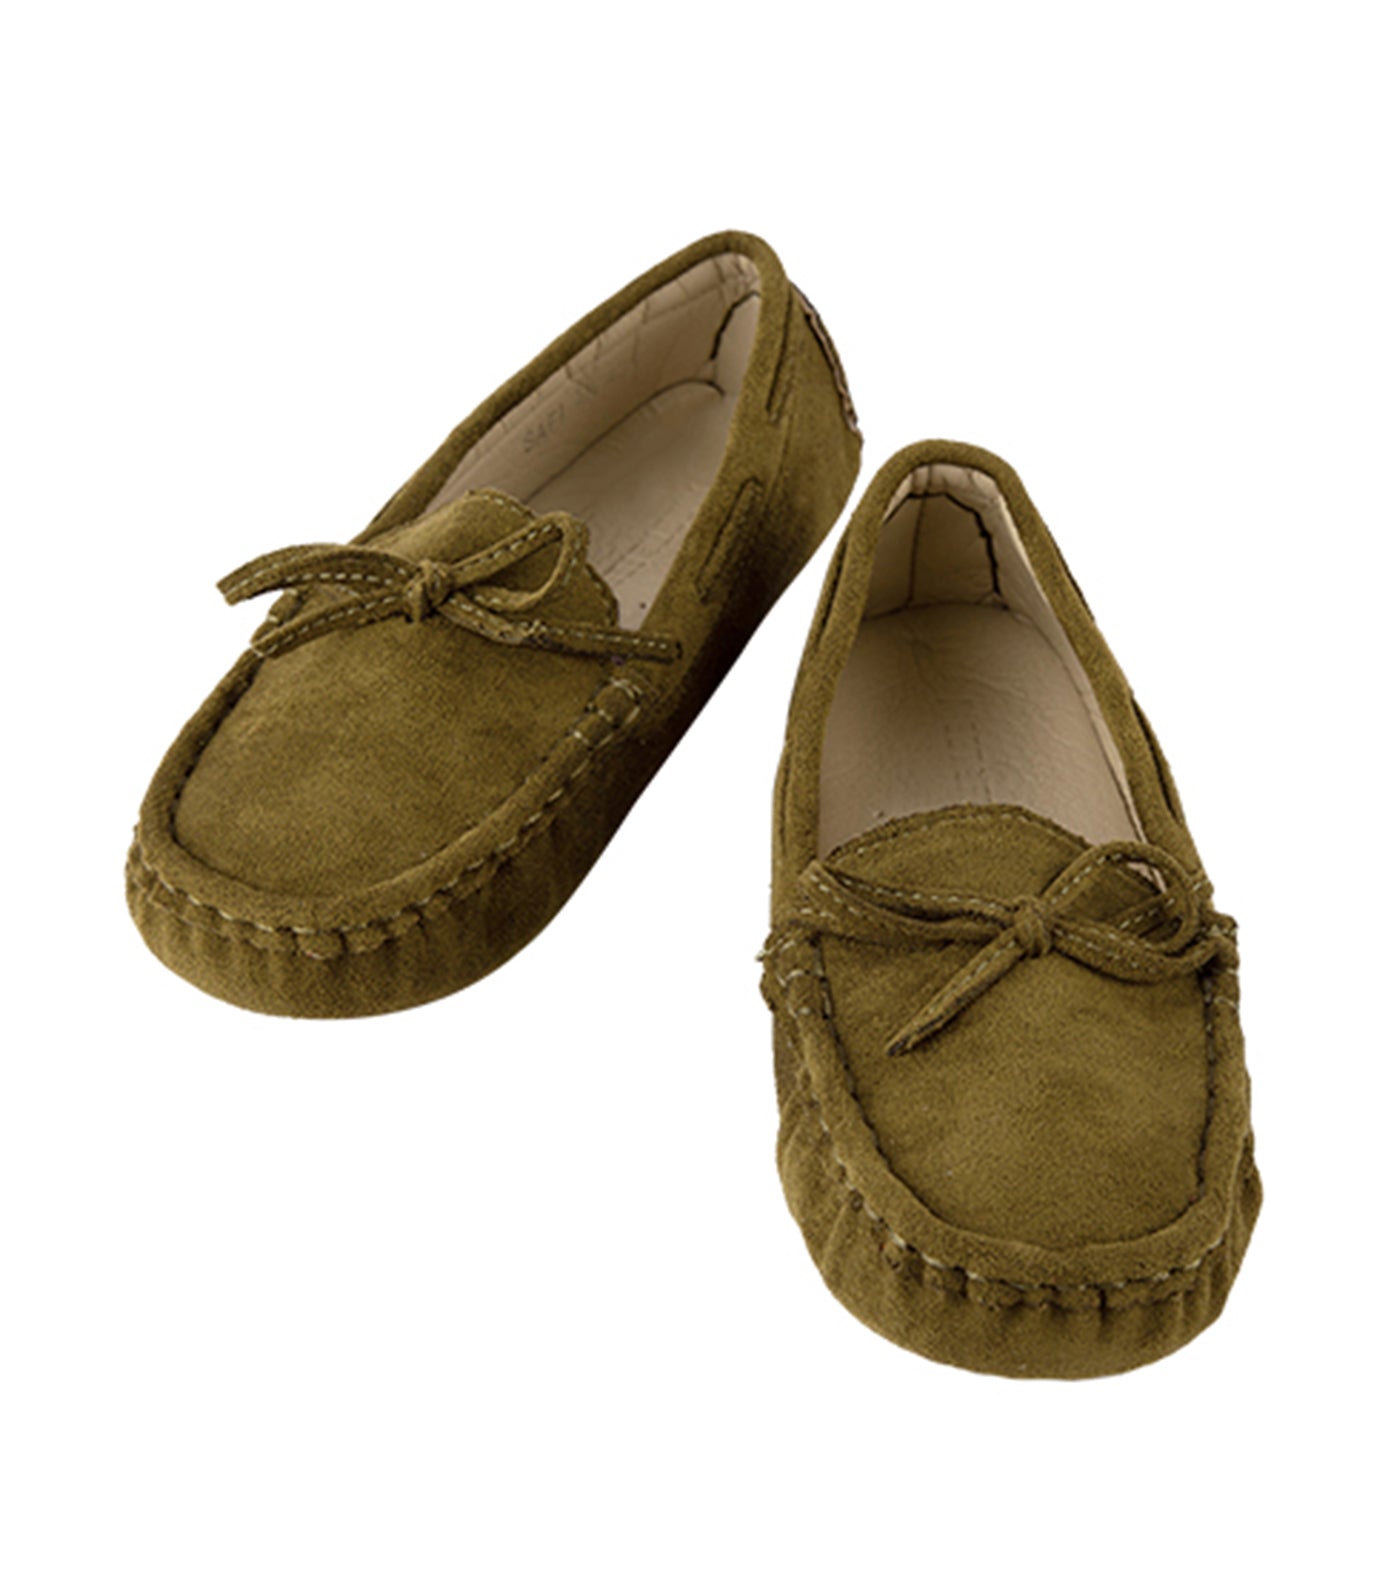 Safi Loafers for Boys - Army Green